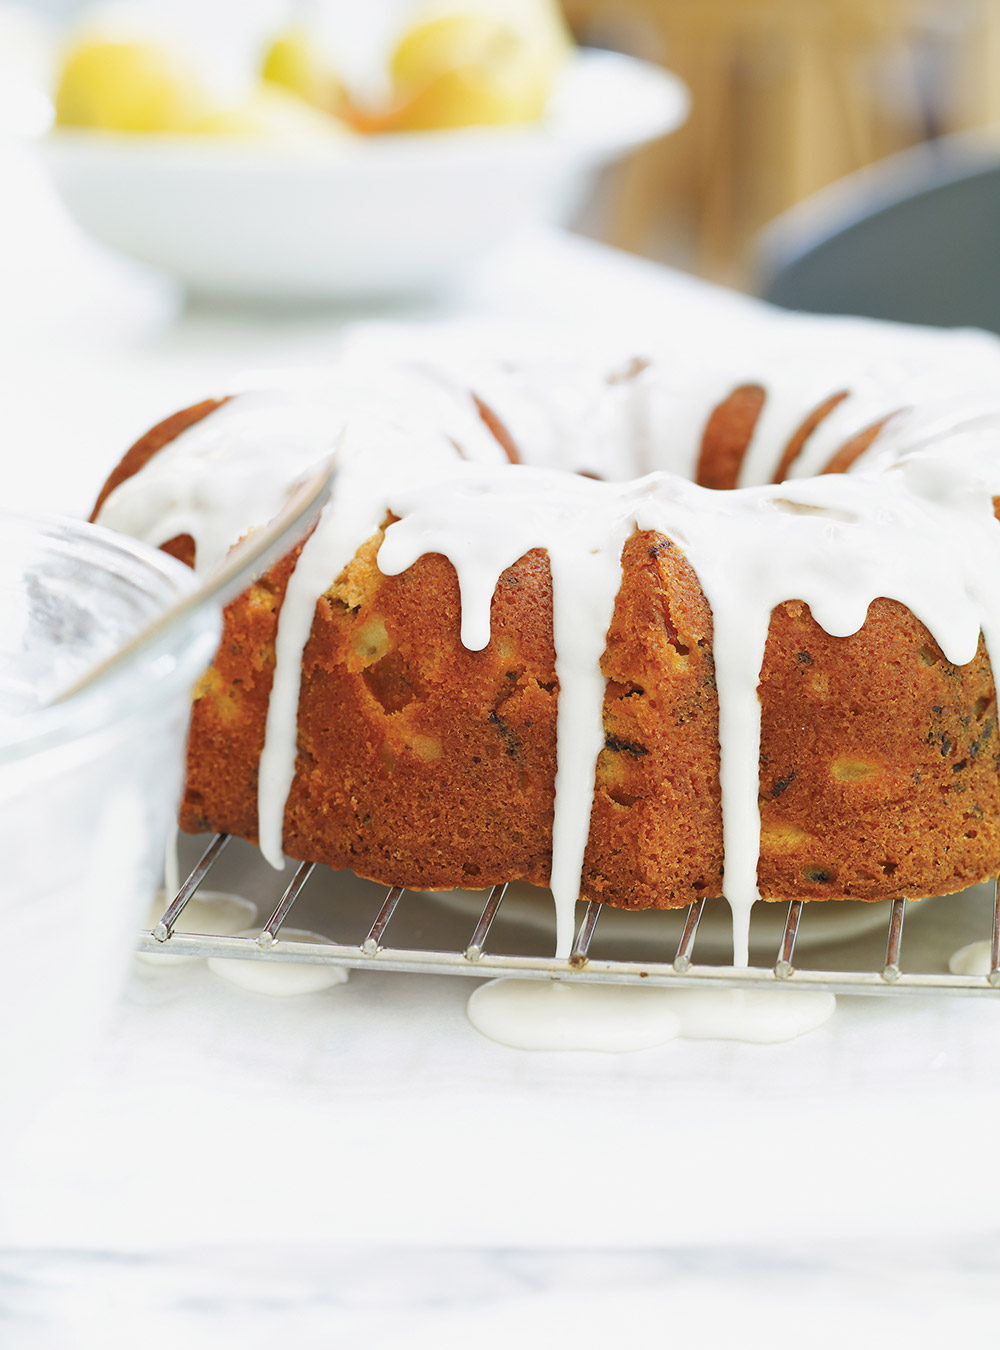 Pear and Chocolate Bundt Cake